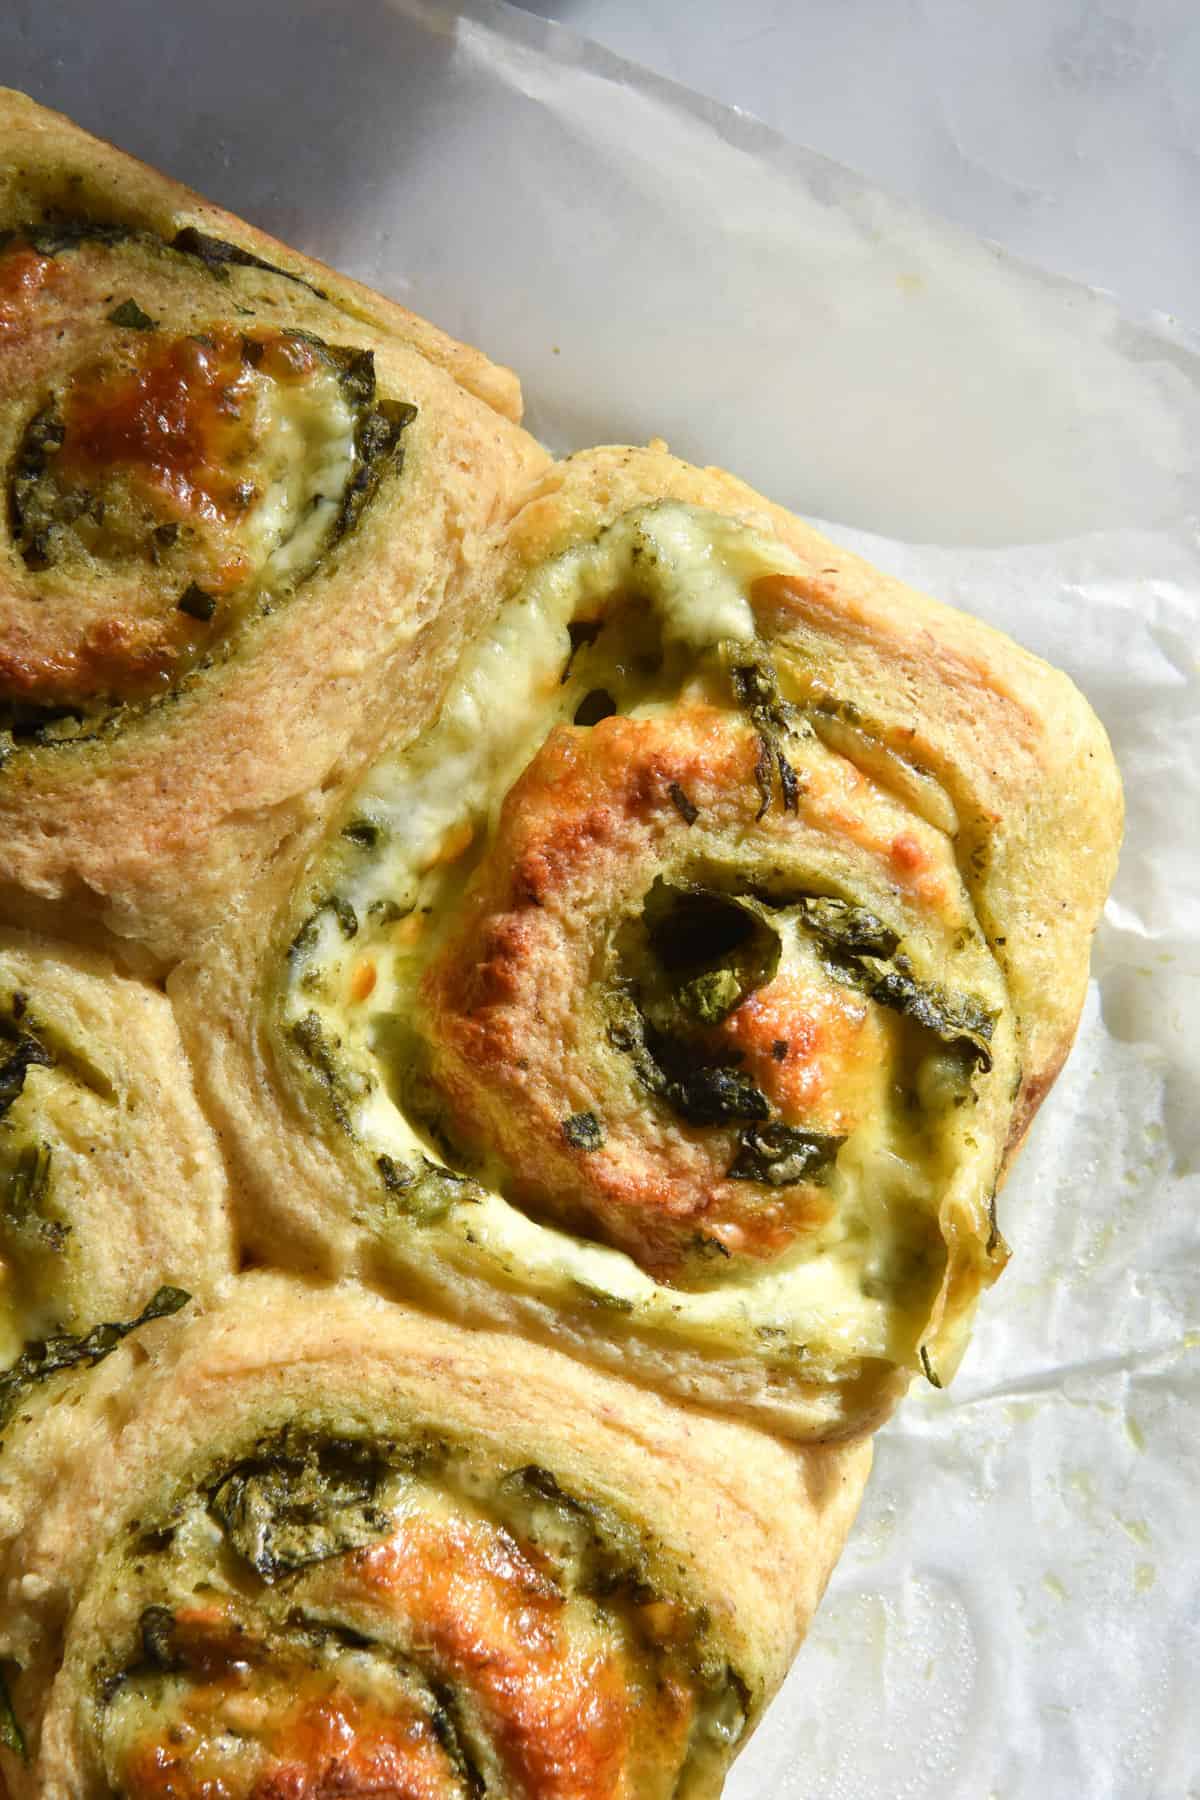 An aerial close up image of freshly baked gluten free pesto scrolls on a white benchtop. The scrolls are golden brown and filled with melty cheese and pesto.